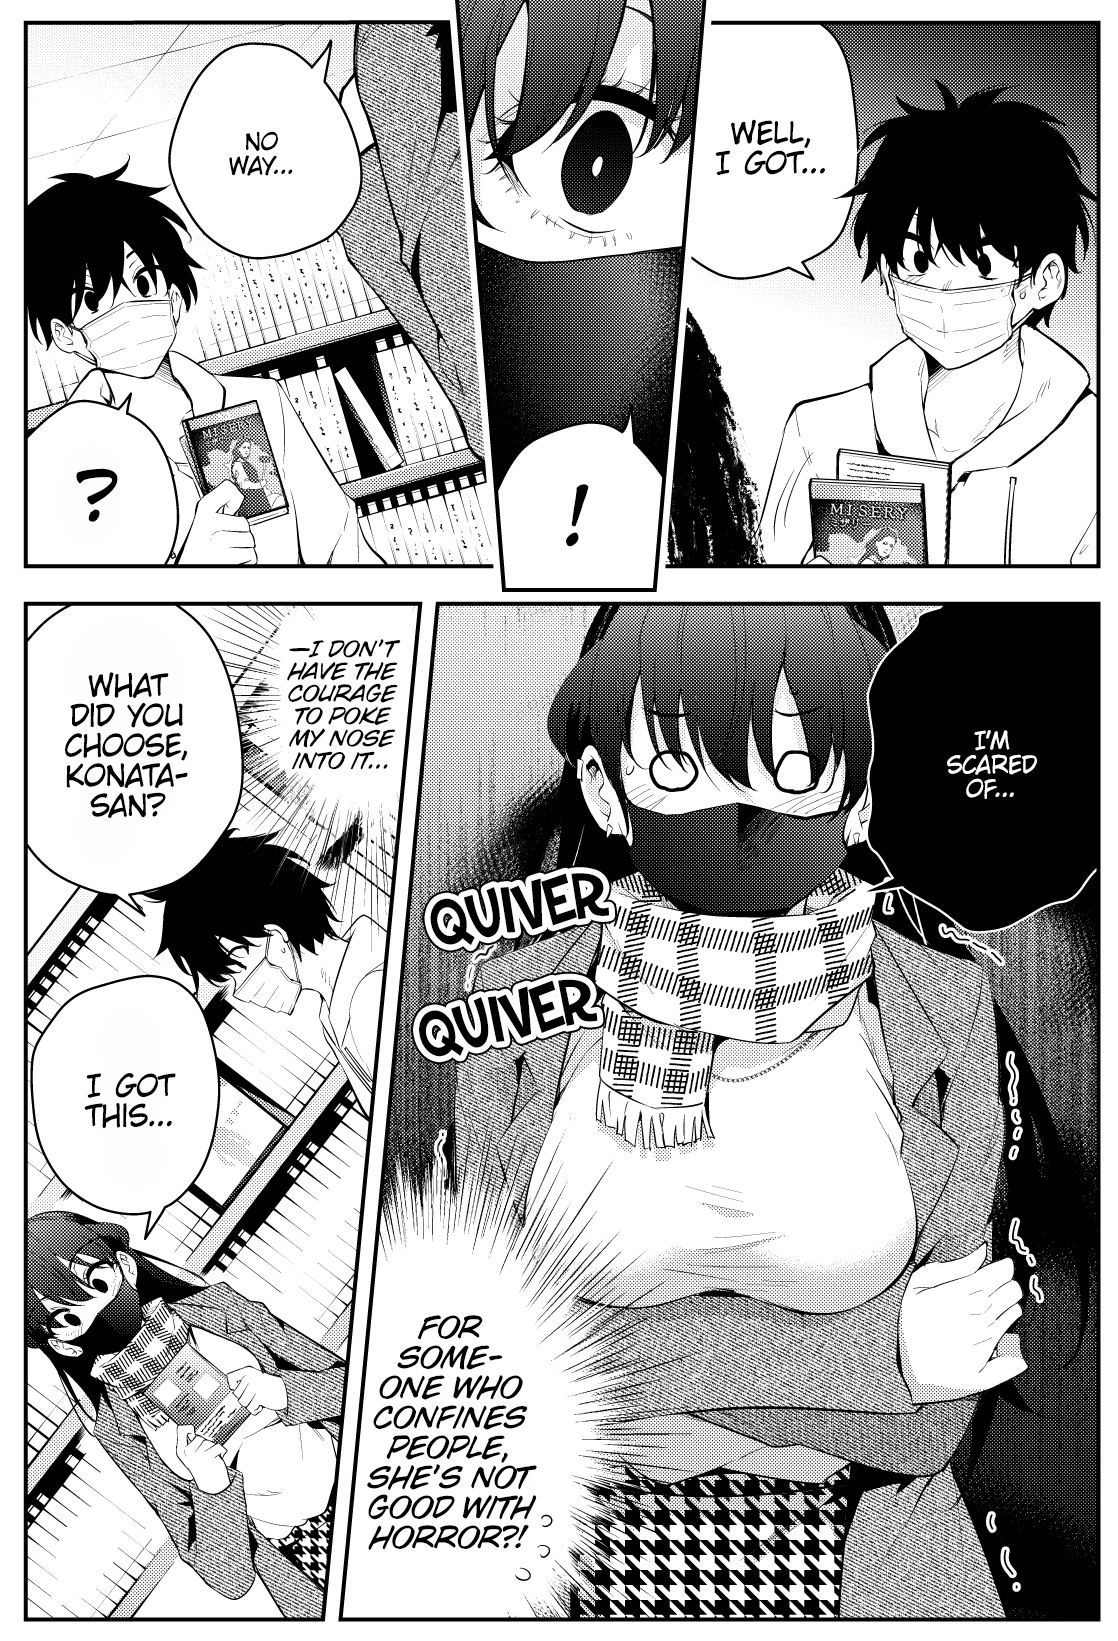 The Story Of A Manga Artist Confined By A Strange High School Girl chapter 36 - page 3